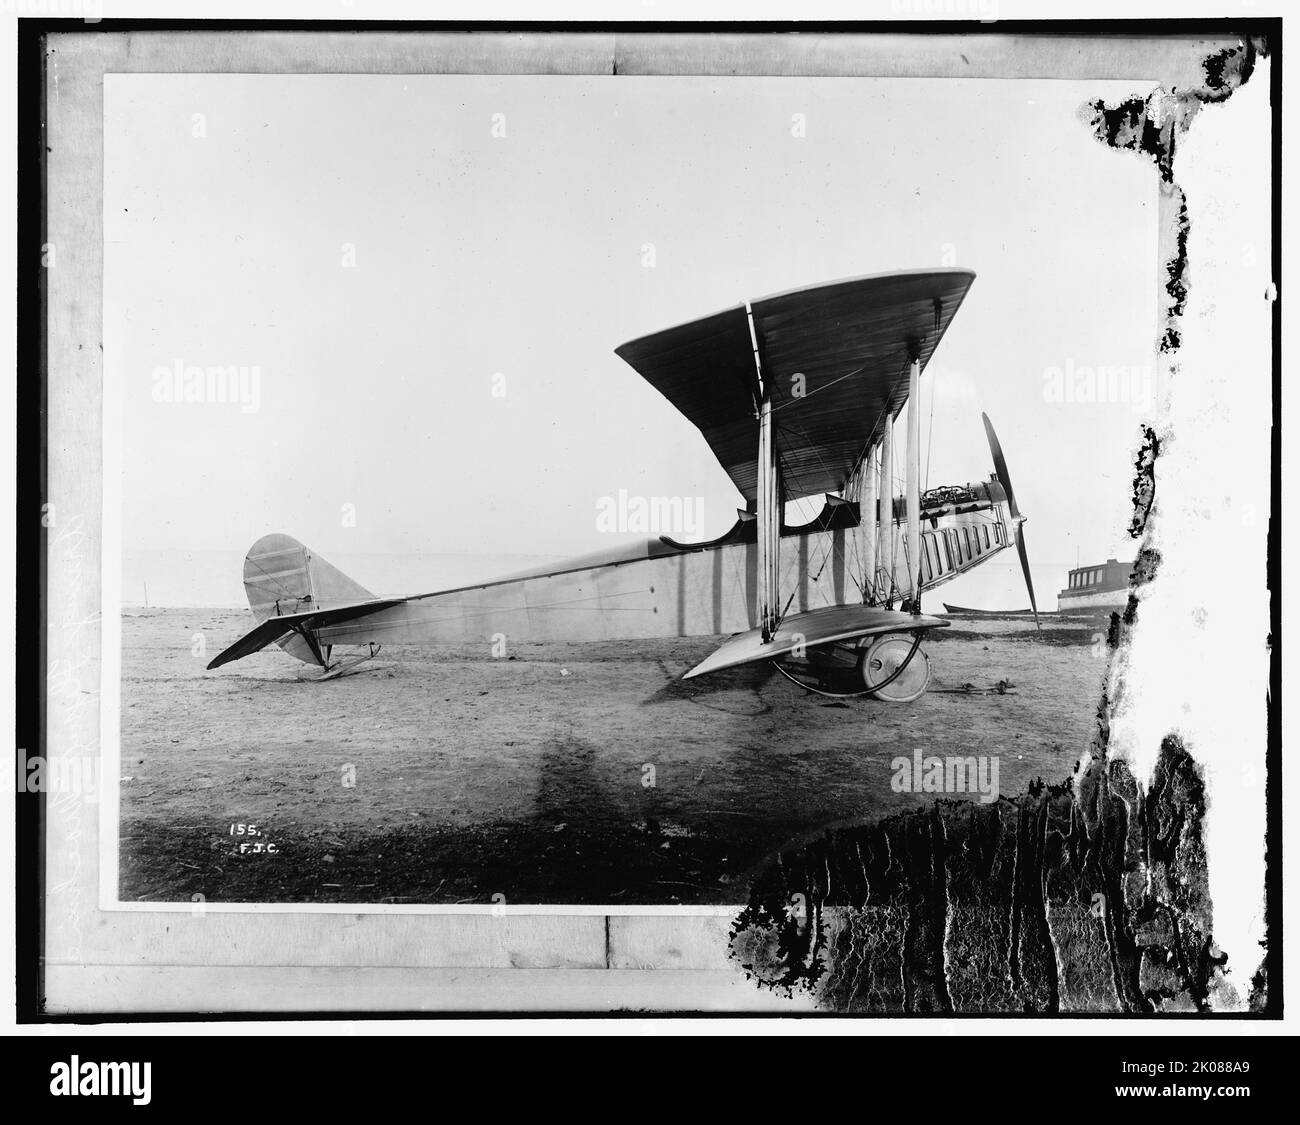 Airplane, between 1910 and 1920. Stock Photo